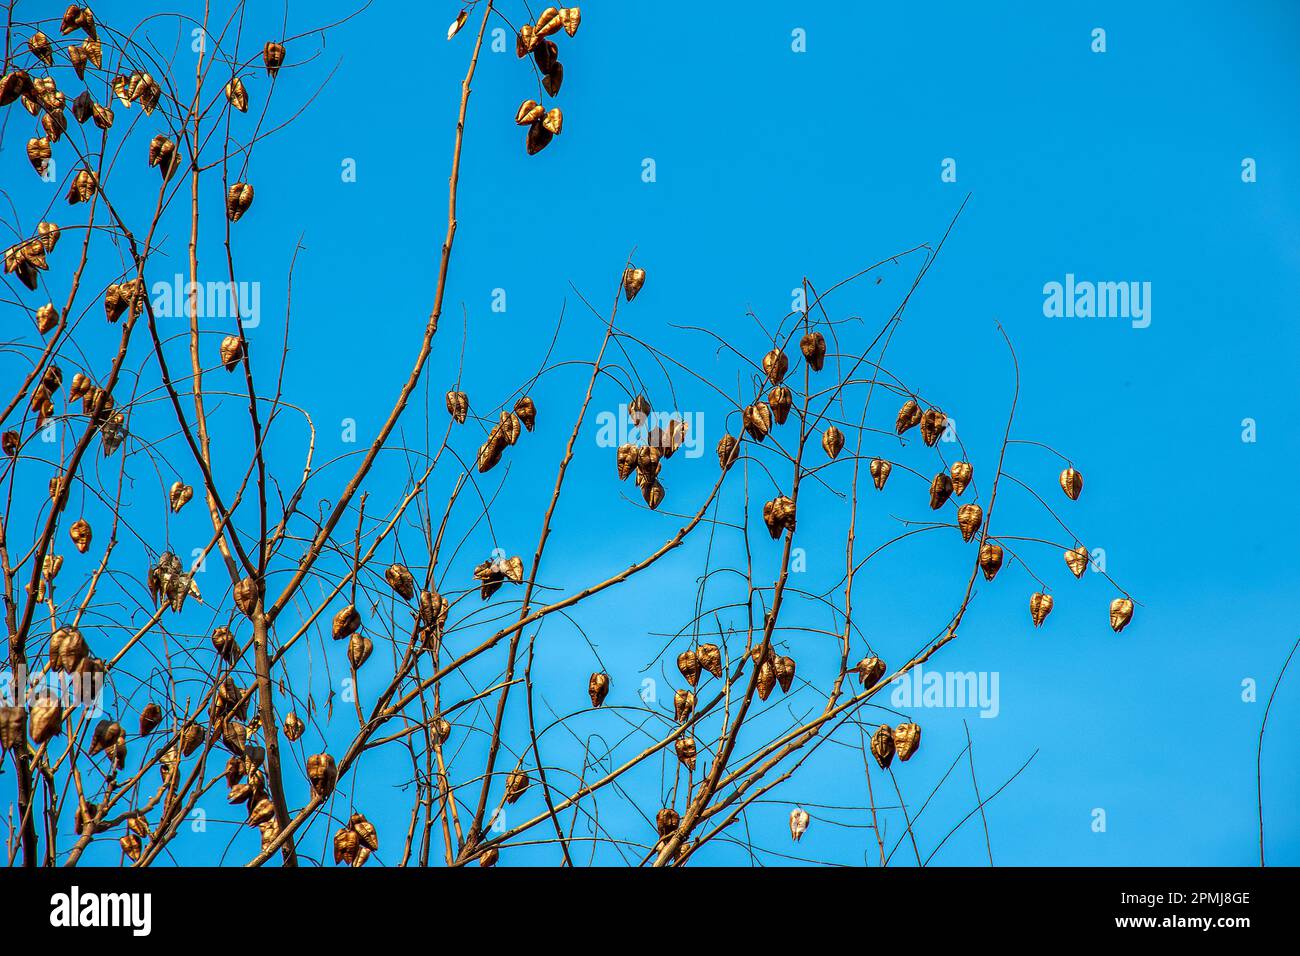 Tree called sapindus saponaria, popularly known as soap tree, with blue sky in the background Stock Photo